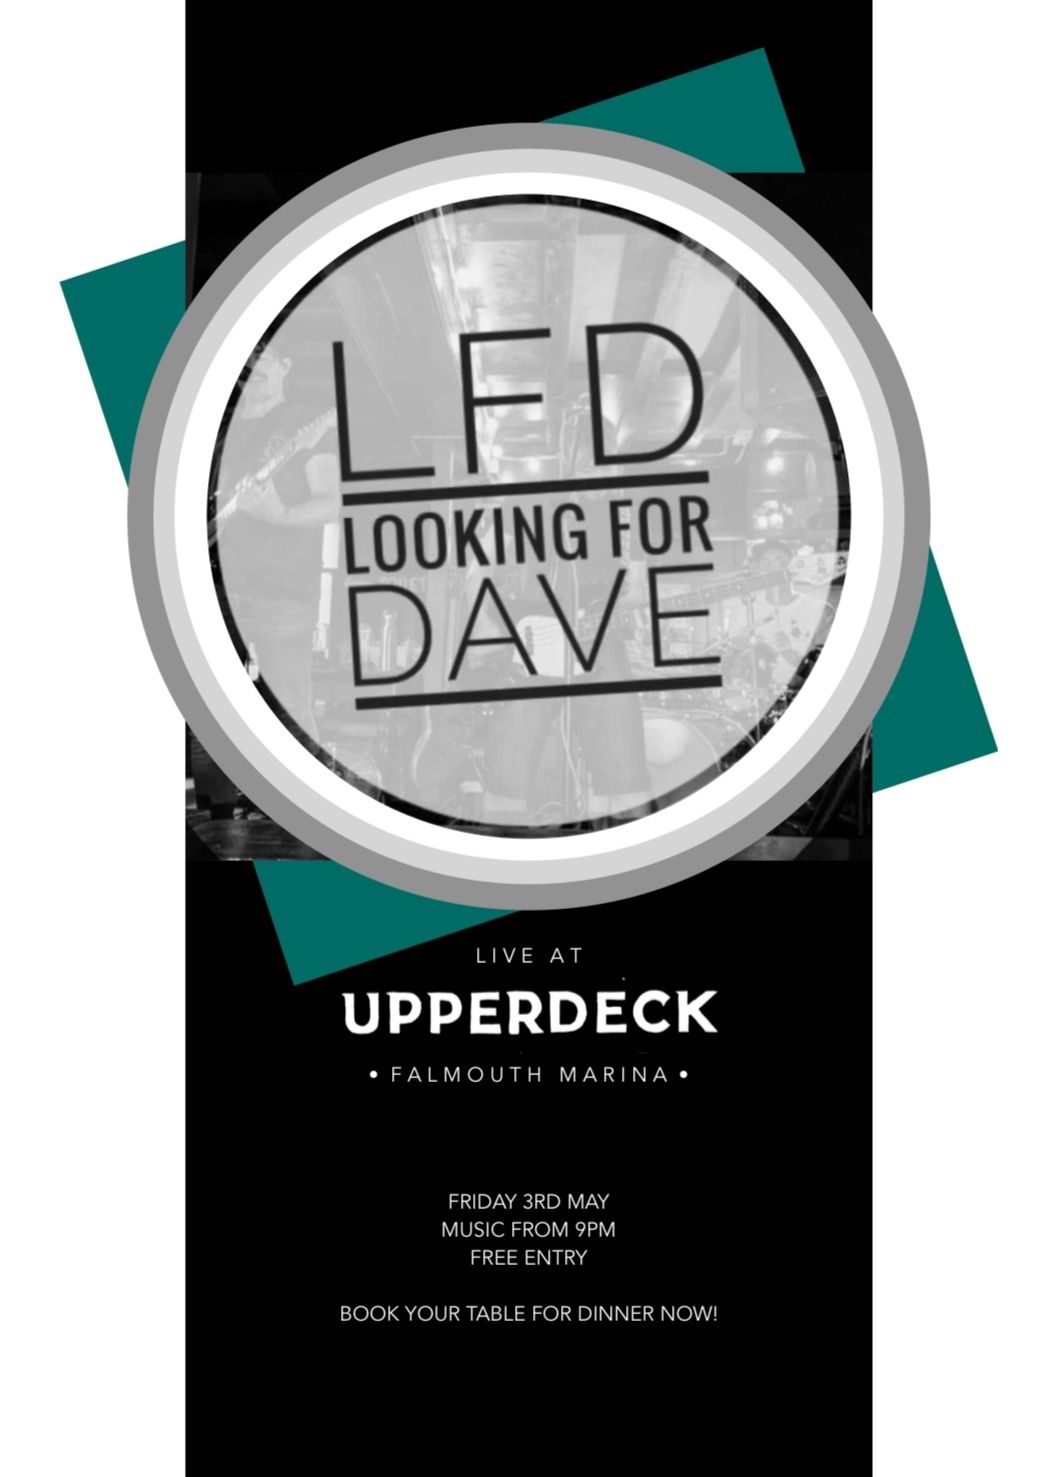 LOOKING FOR DAVE \u2022 LIVE AT UPPERDECK 